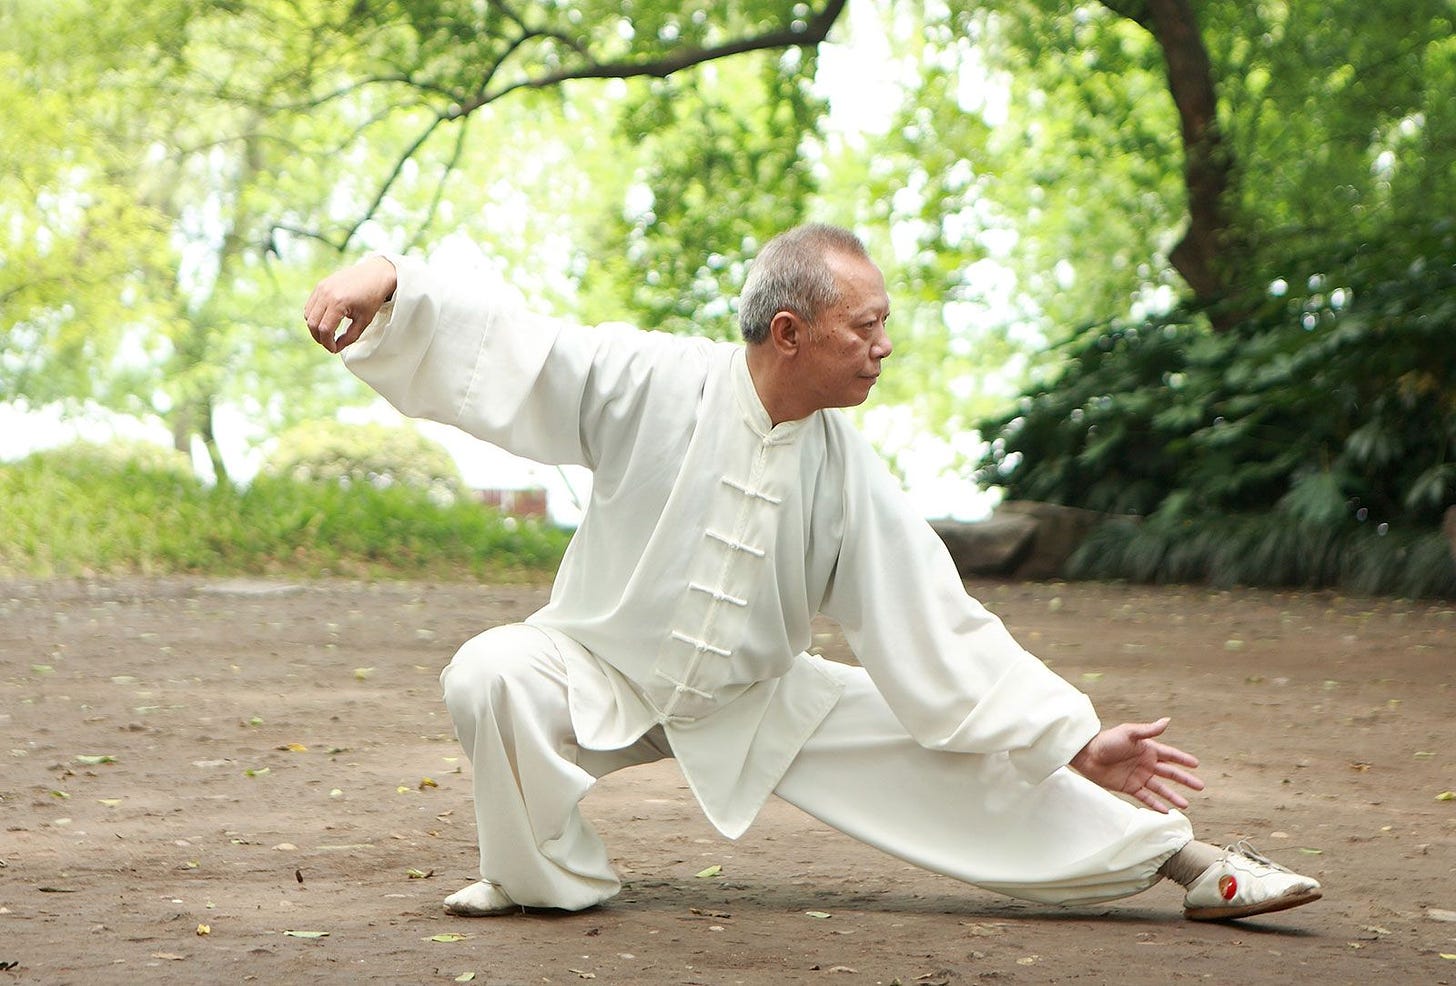 tai chi chuan | Definition, Meaning, History, Forms, & Facts | Britannica